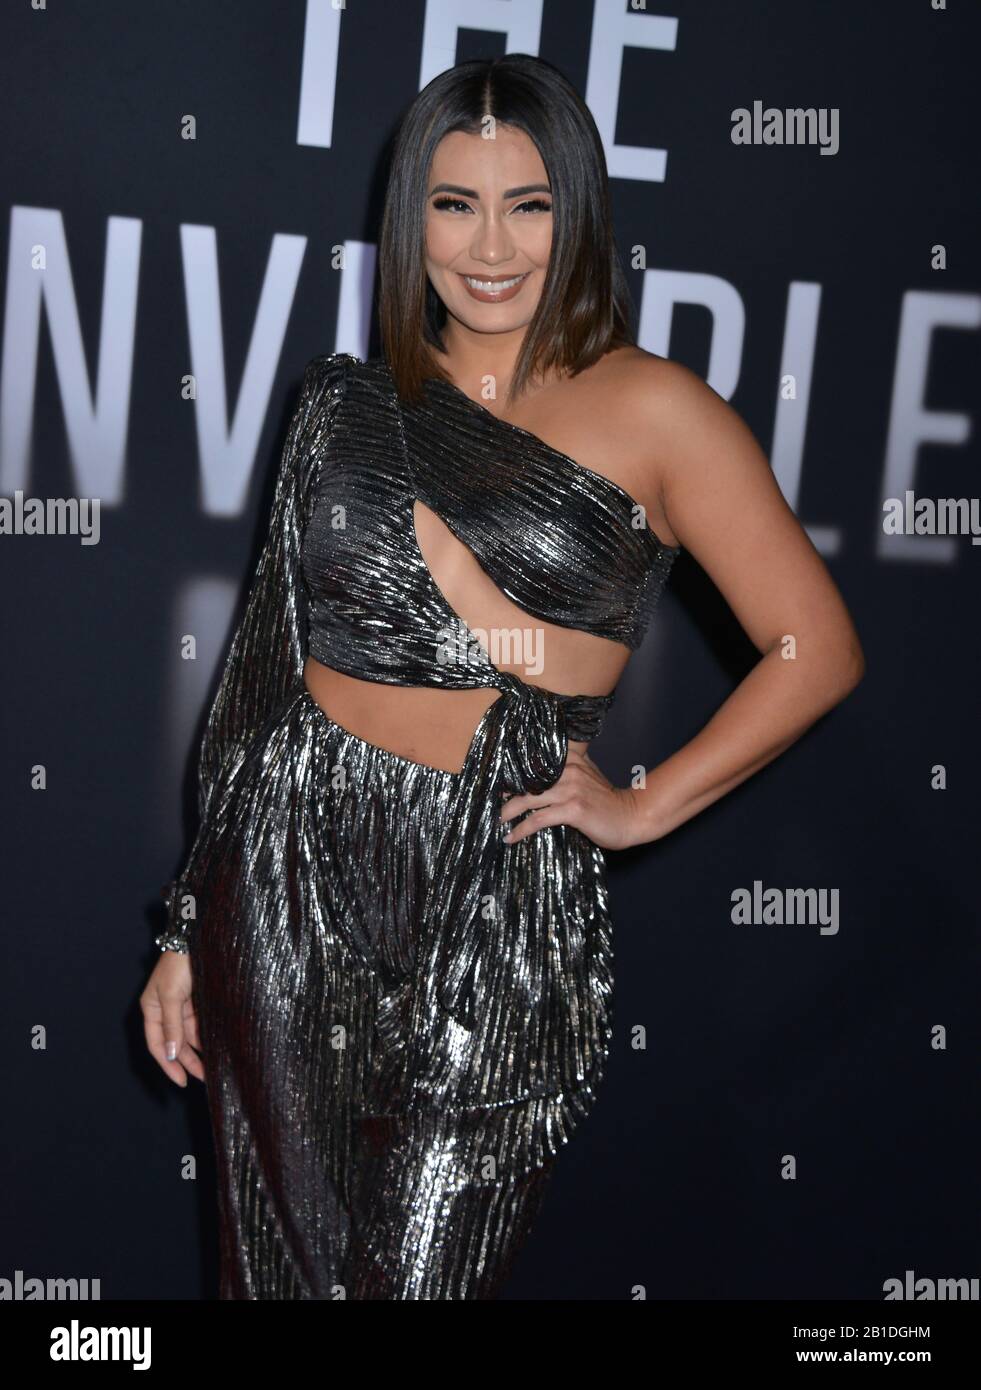 Los Angeles, USA. 25th Feb, 2020. Sandra Gutierrez 004 attends the Premiere of Universal Pictures' 'The Invisible Man' at TCL Chinese Theatre on February 24, 2020 in Hollywood, California Credit: Tsuni/USA/Alamy Live News Stock Photo